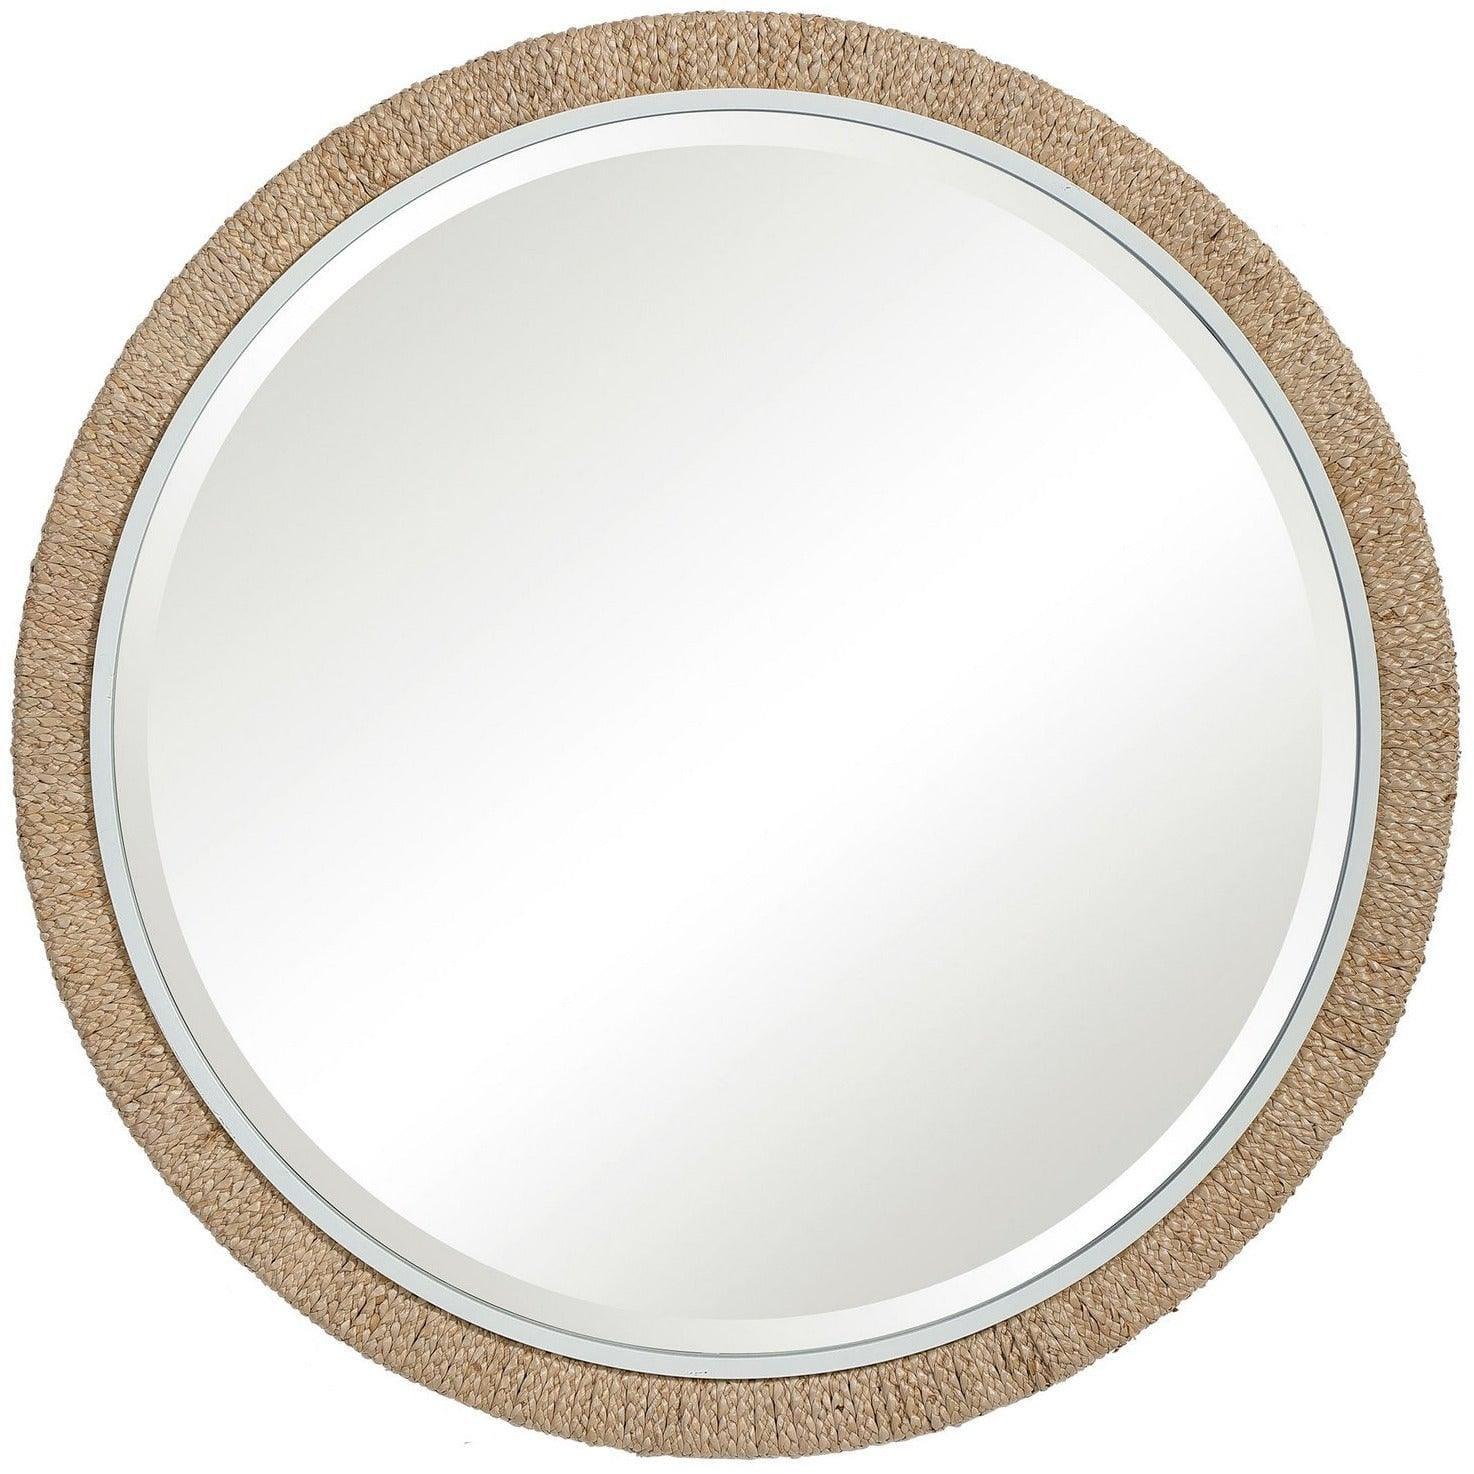 The Uttermost - Carbet Mirror - 09668 | Montreal Lighting & Hardware